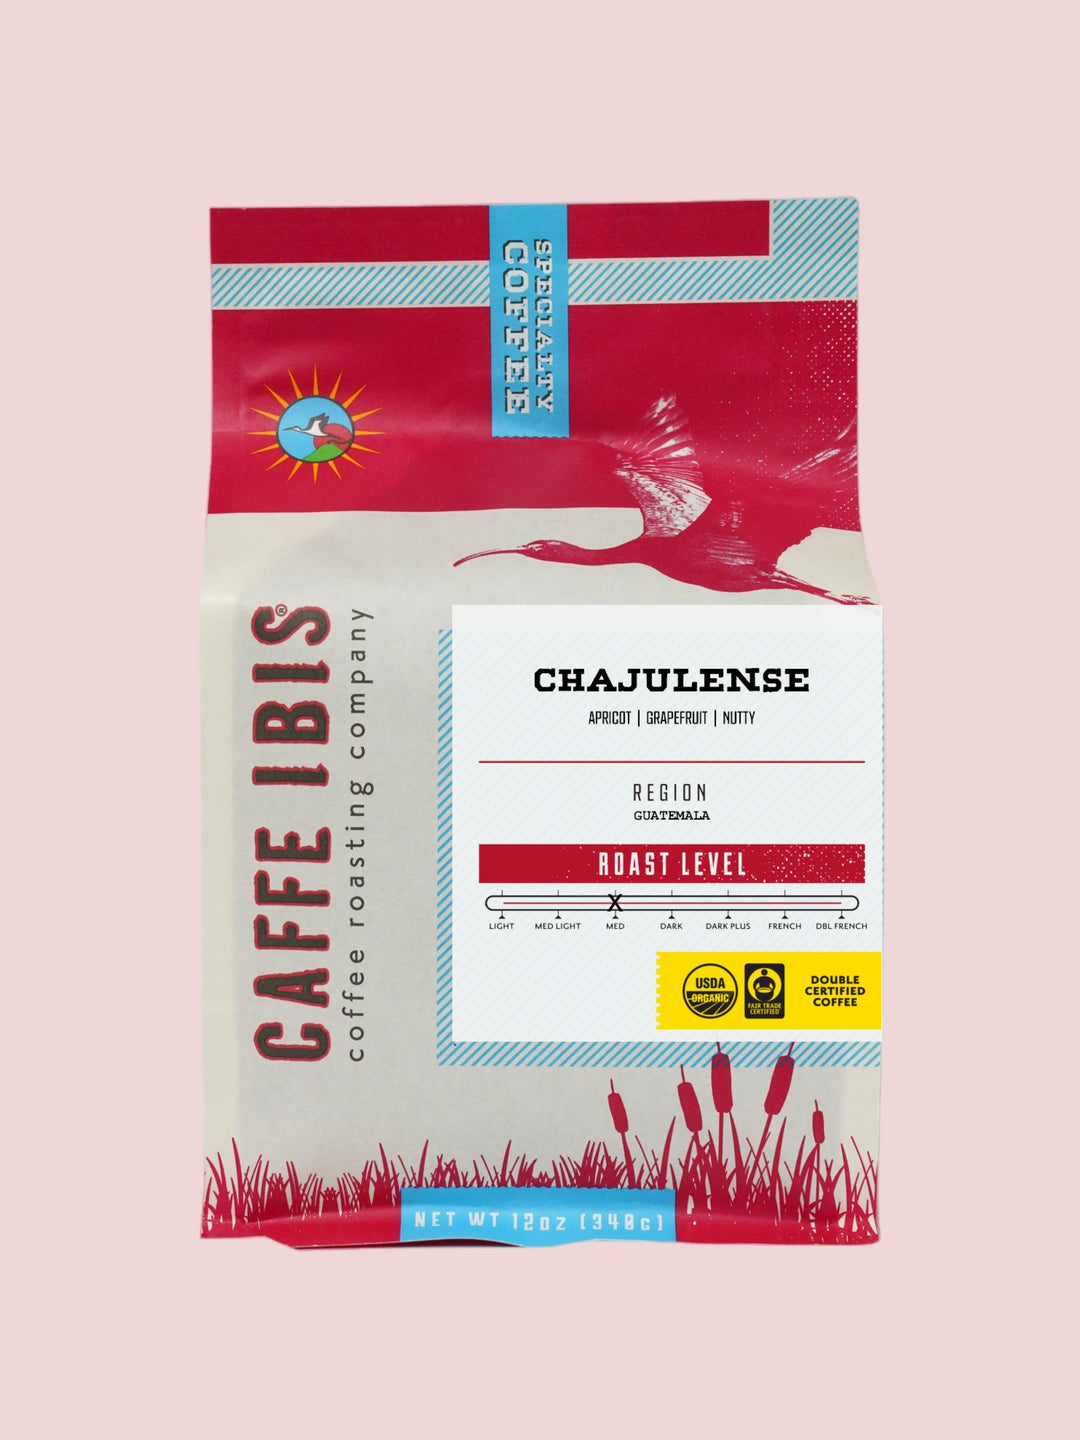  Caffe Ibis organic Chajulense coffee in a red twelve ounce bag; front view.